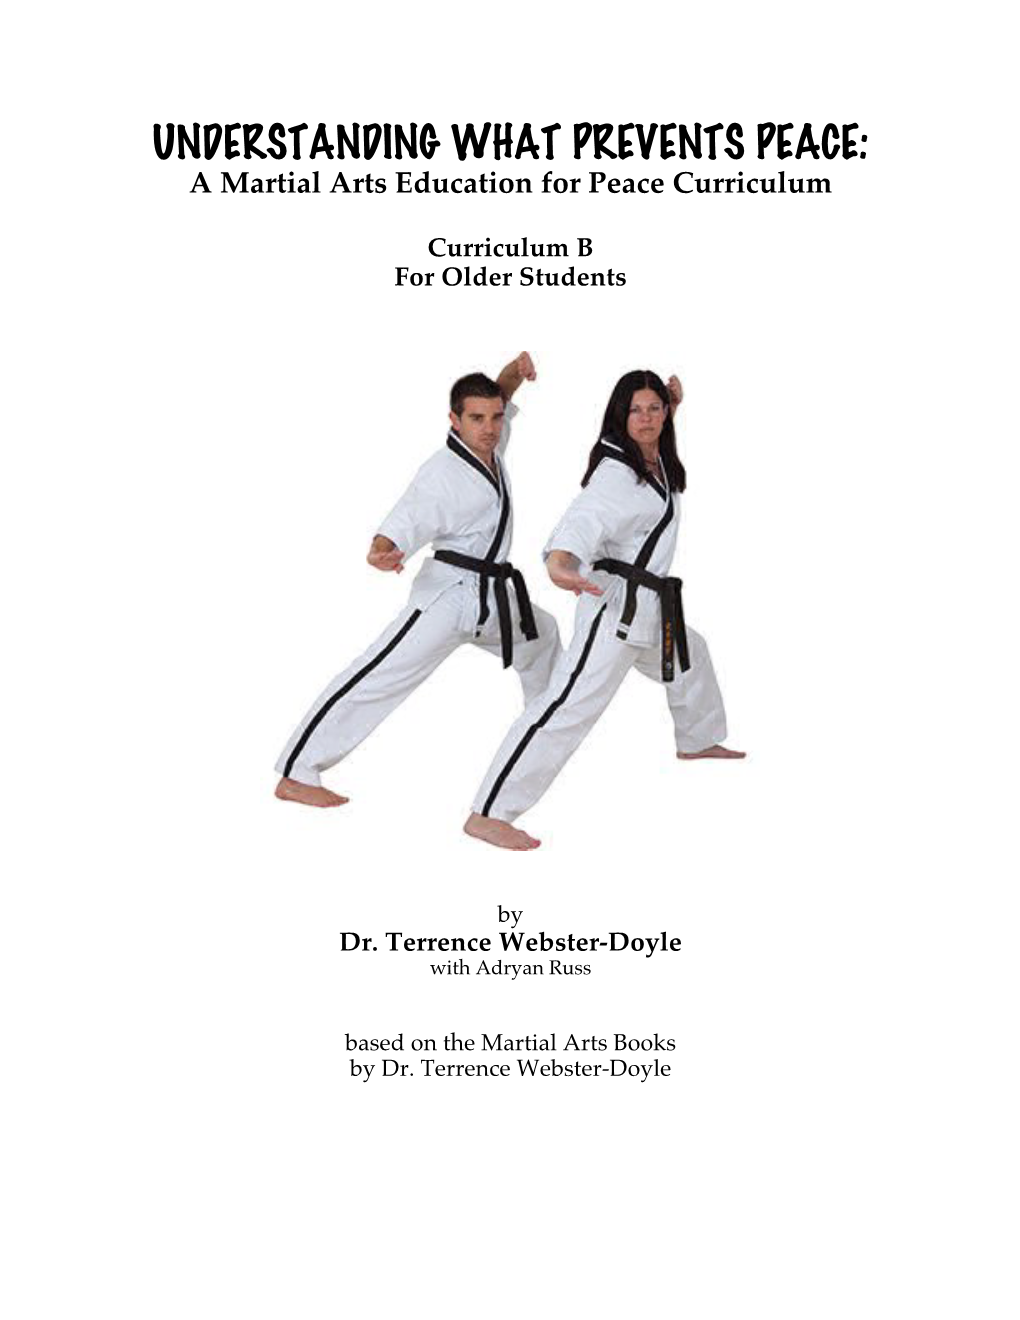 UNDERSTANDING WHAT PREVENTS PEACE: a Martial Arts Education for Peace Curriculum